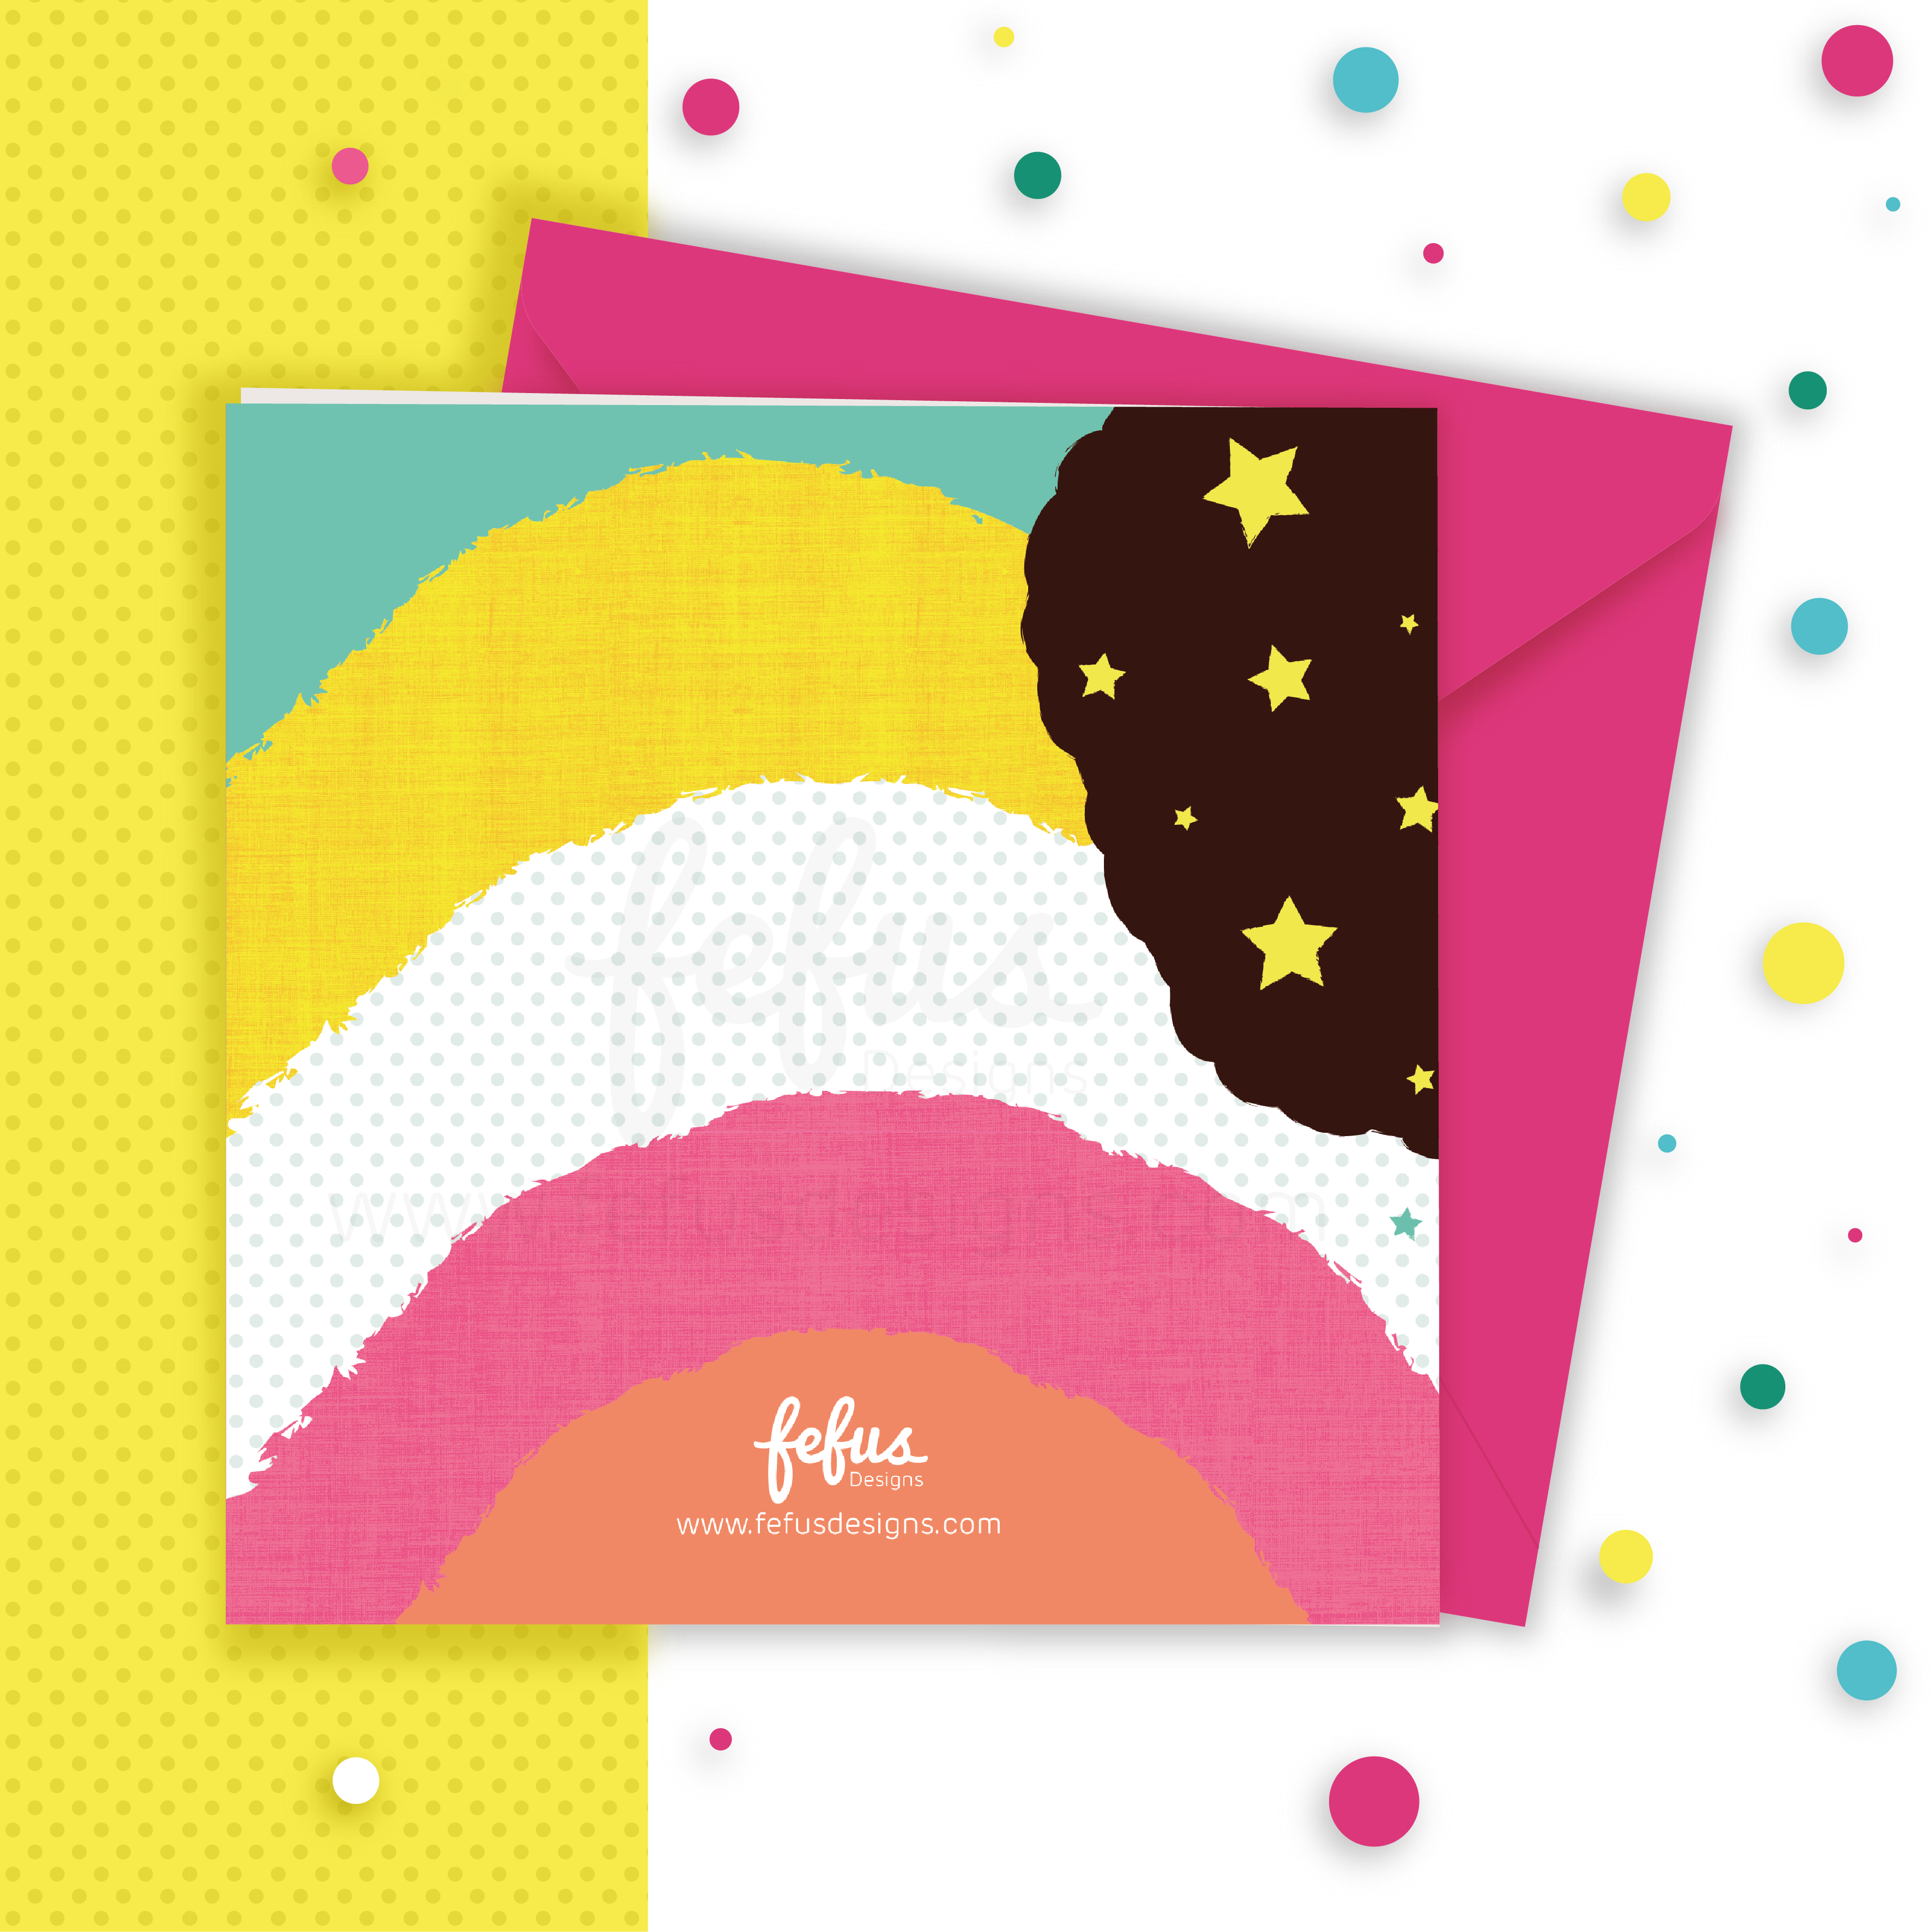 Mum To Be Greetings Card for Diverse Parents | Congratulations & Encouragement Card